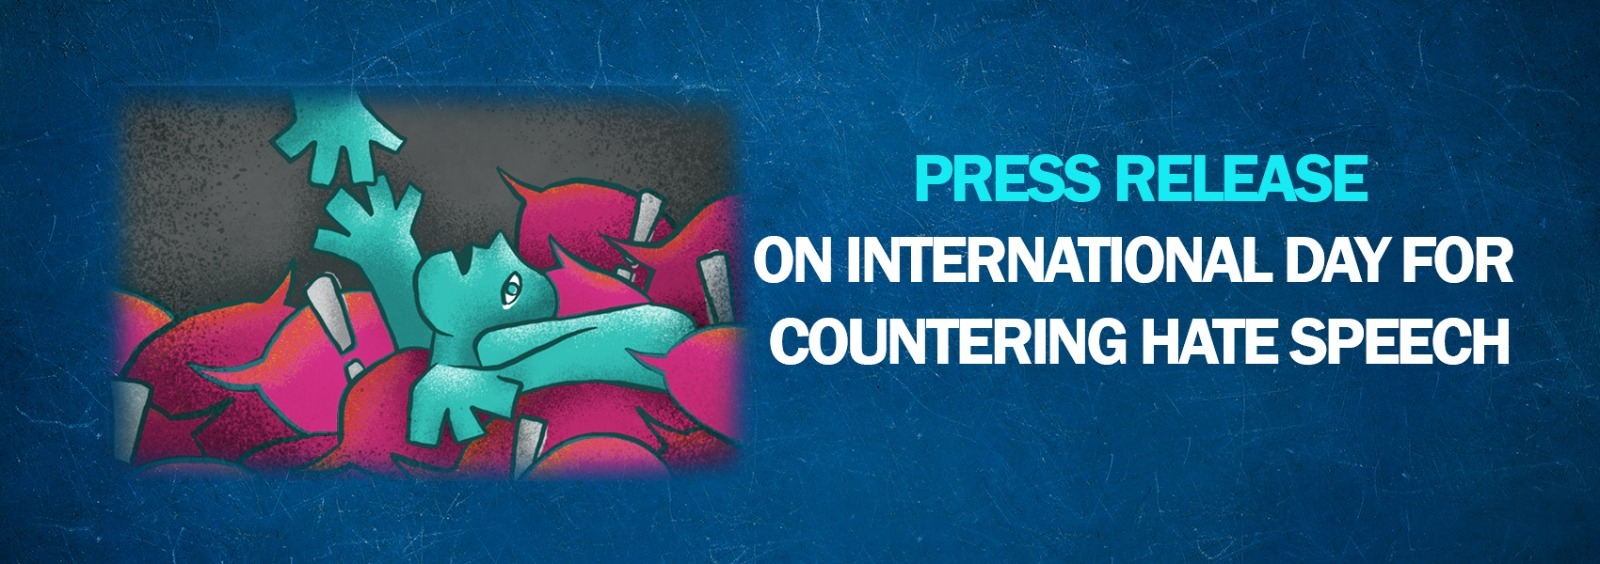 Press Release on International Day for Countering Hate Speech